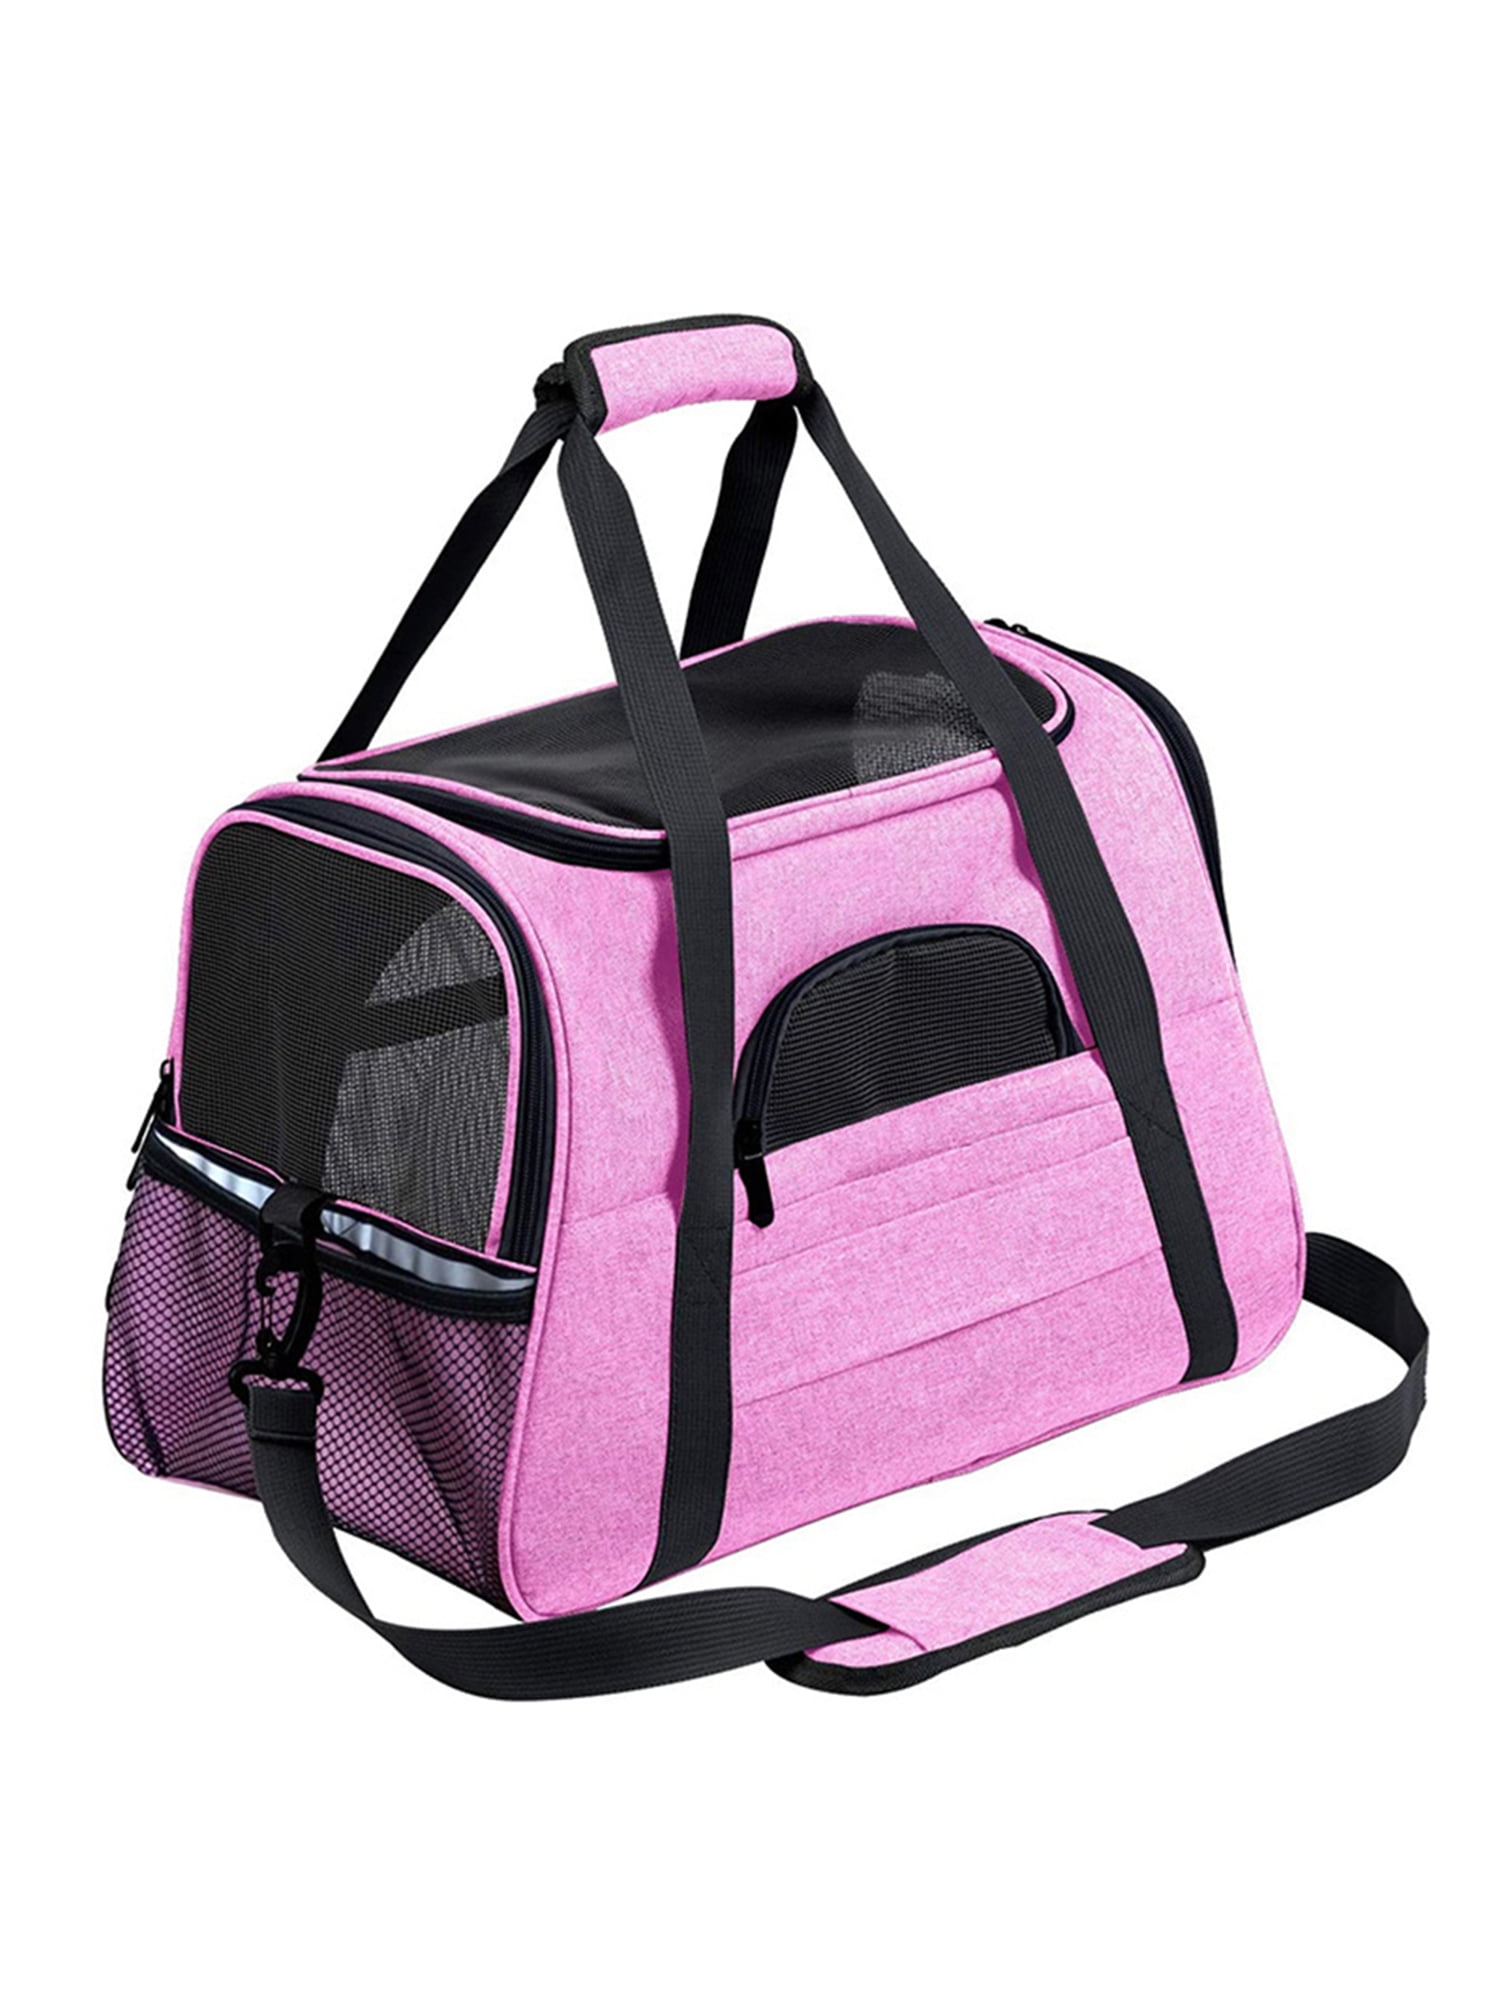 NEW Kate Quilted Carrier, Pink and Black Plaid – The Dog Squad